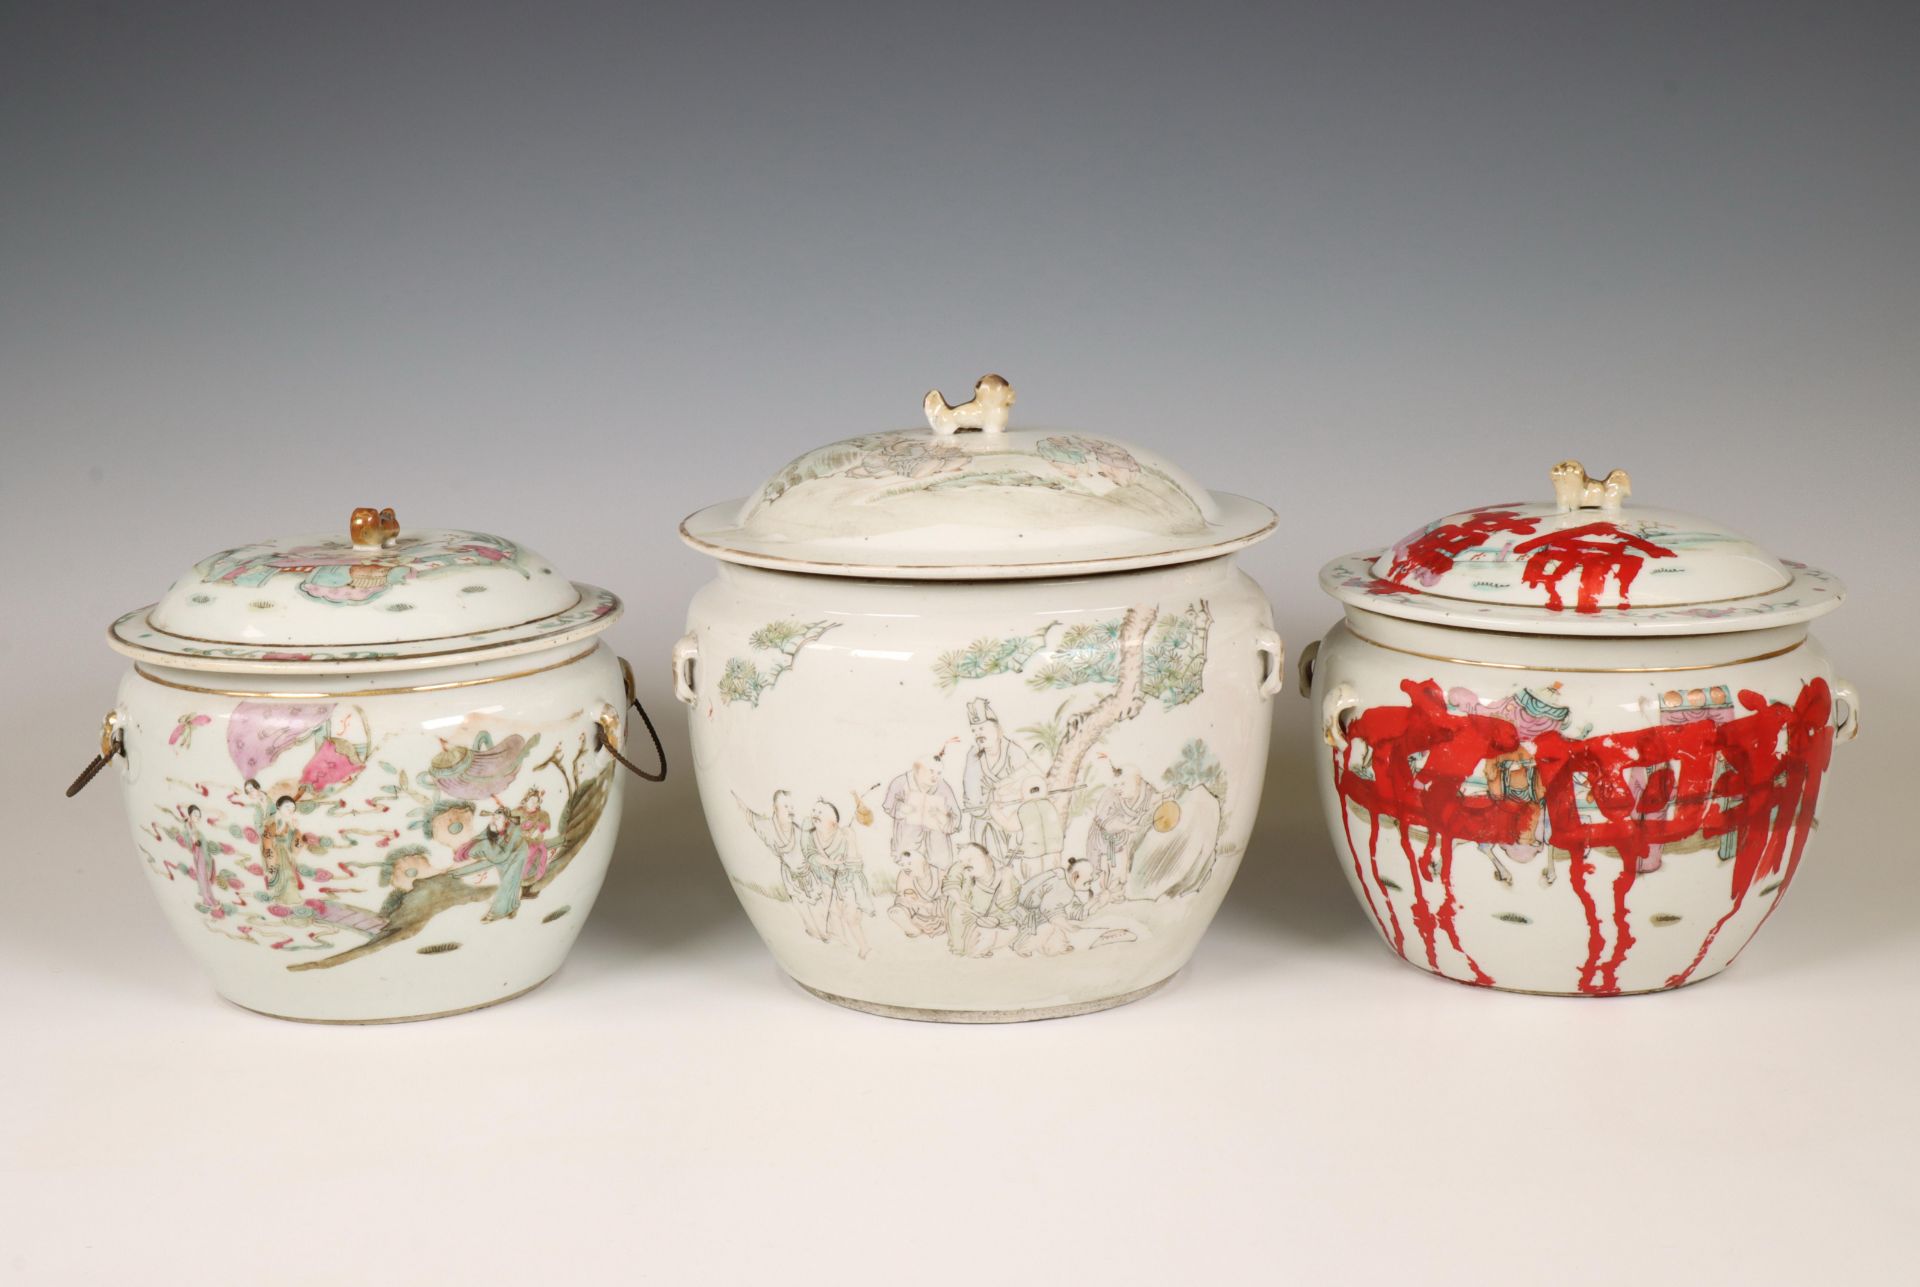 China, three famille rose porcelain jars and covers, 20th century,